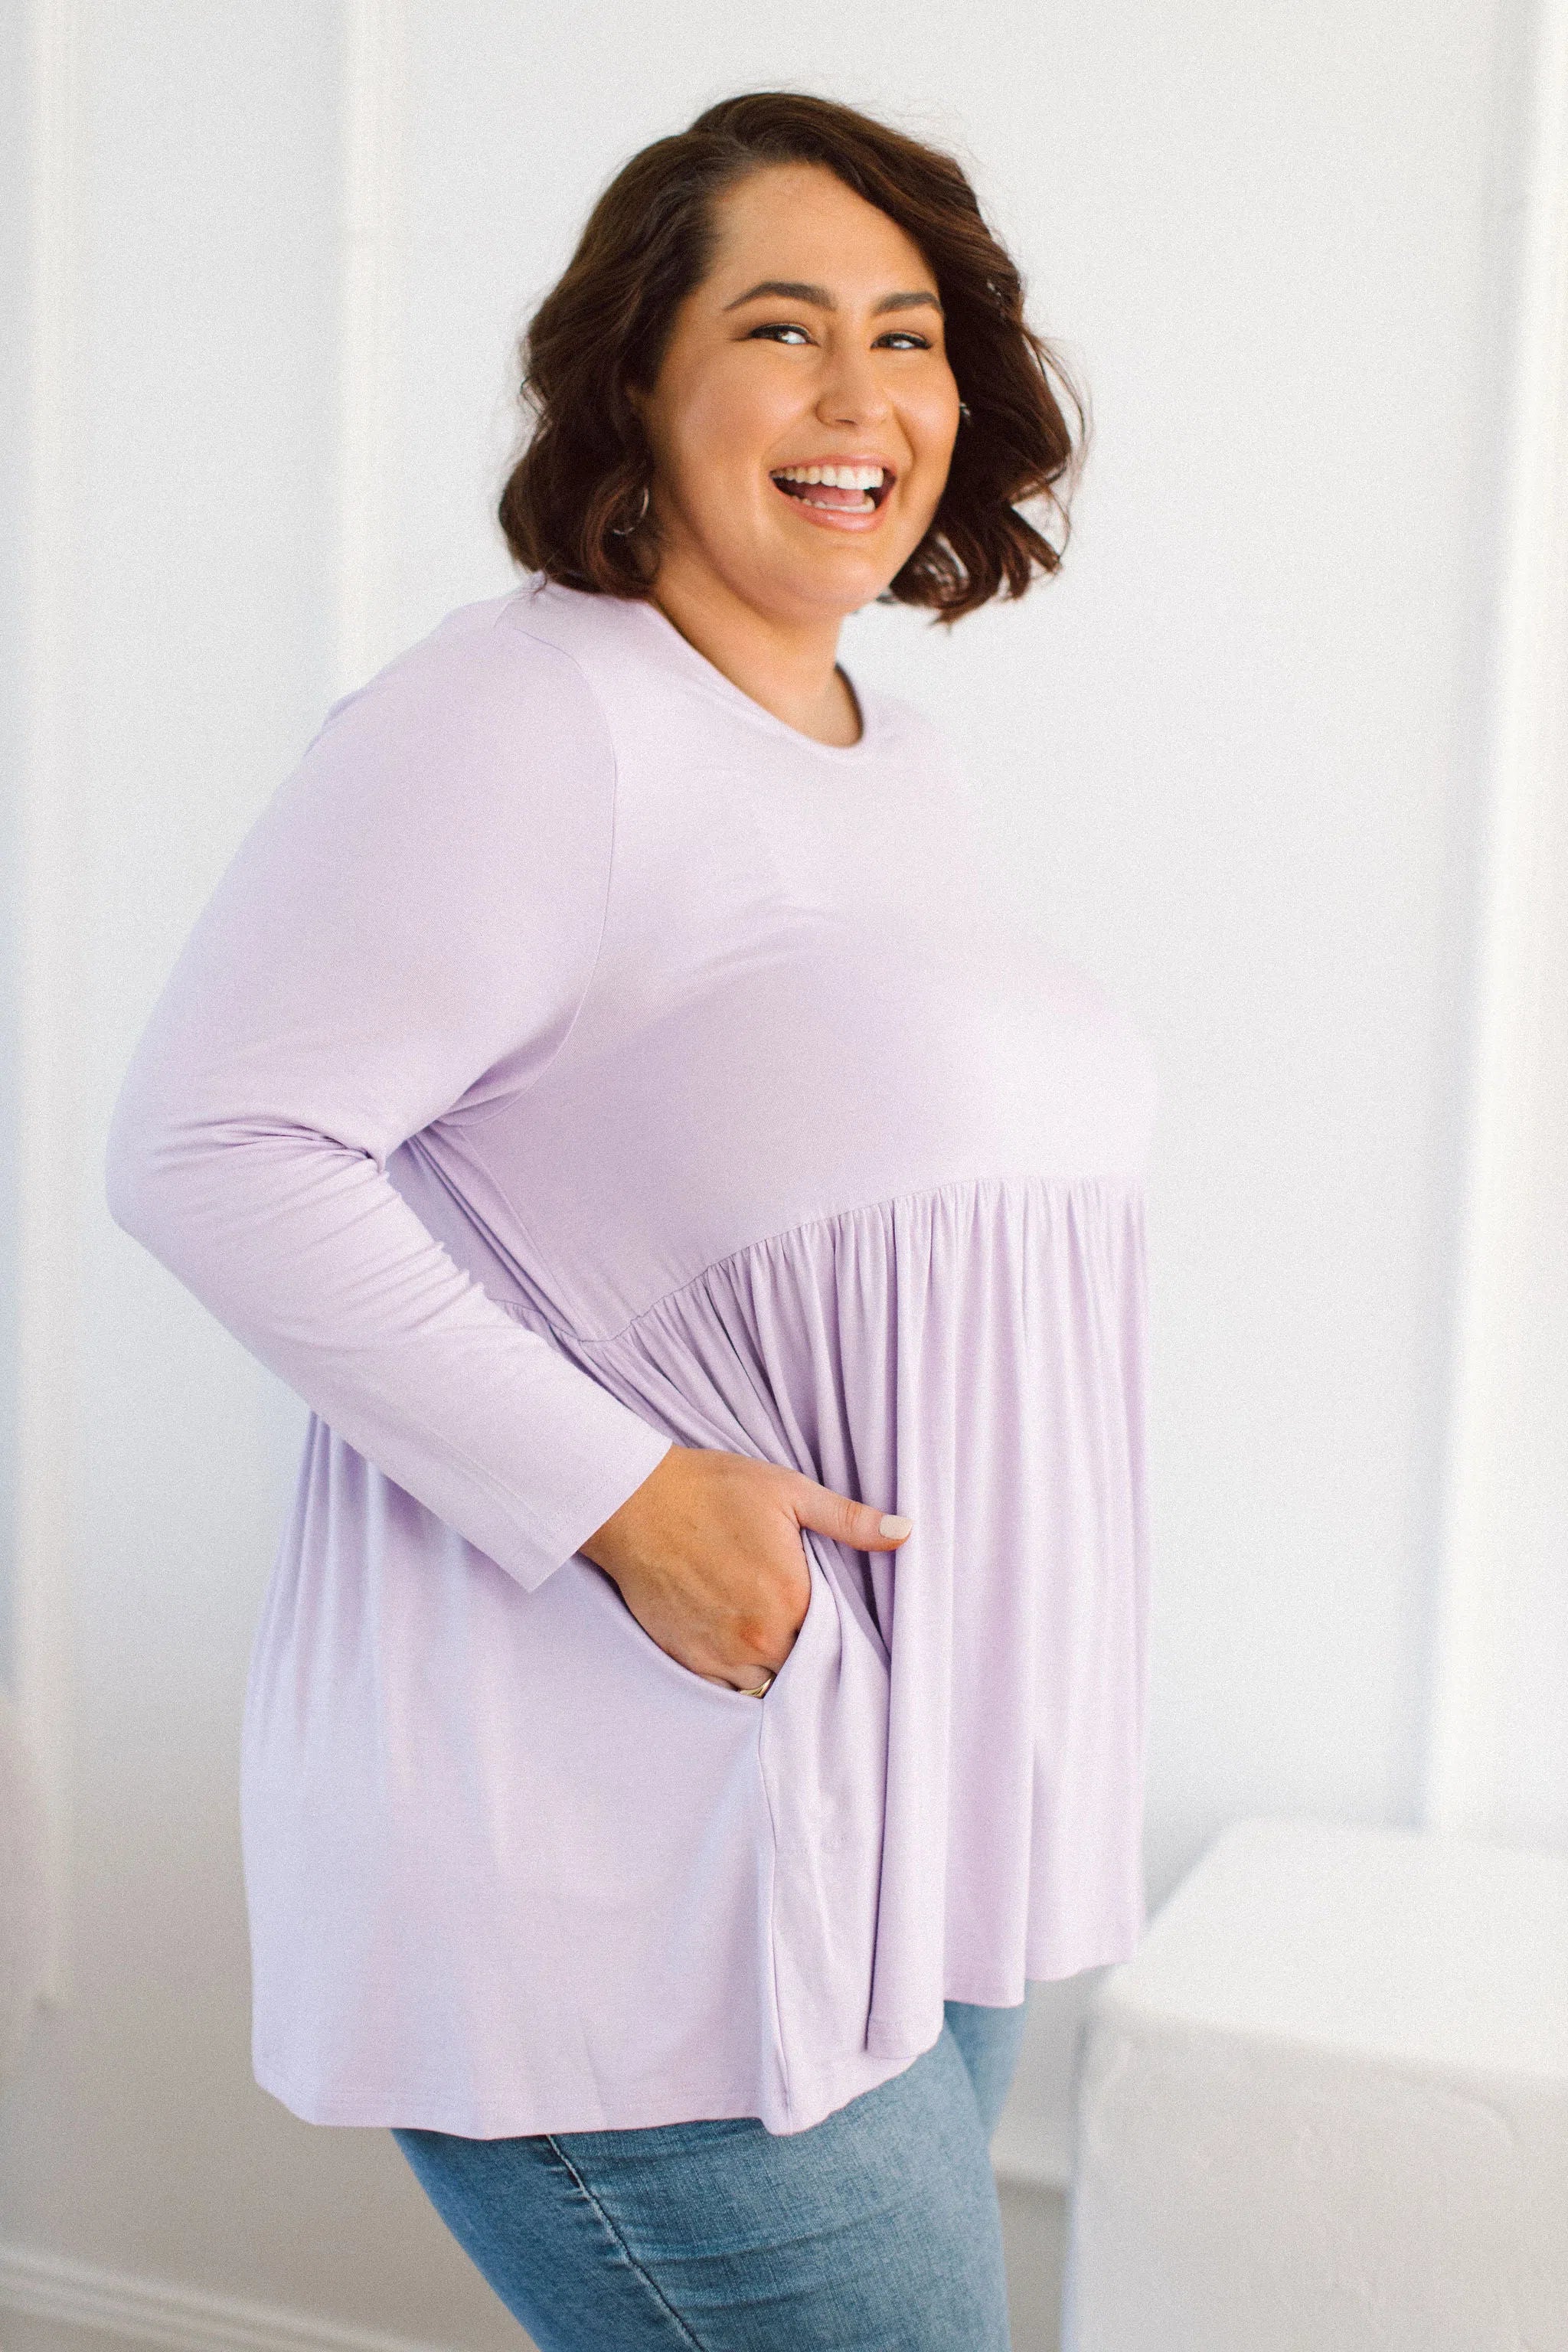 Plus Size clothing,  women modeling a Curvy Womens Tops, Lucy Long Sleeve Top in Purple Lilac